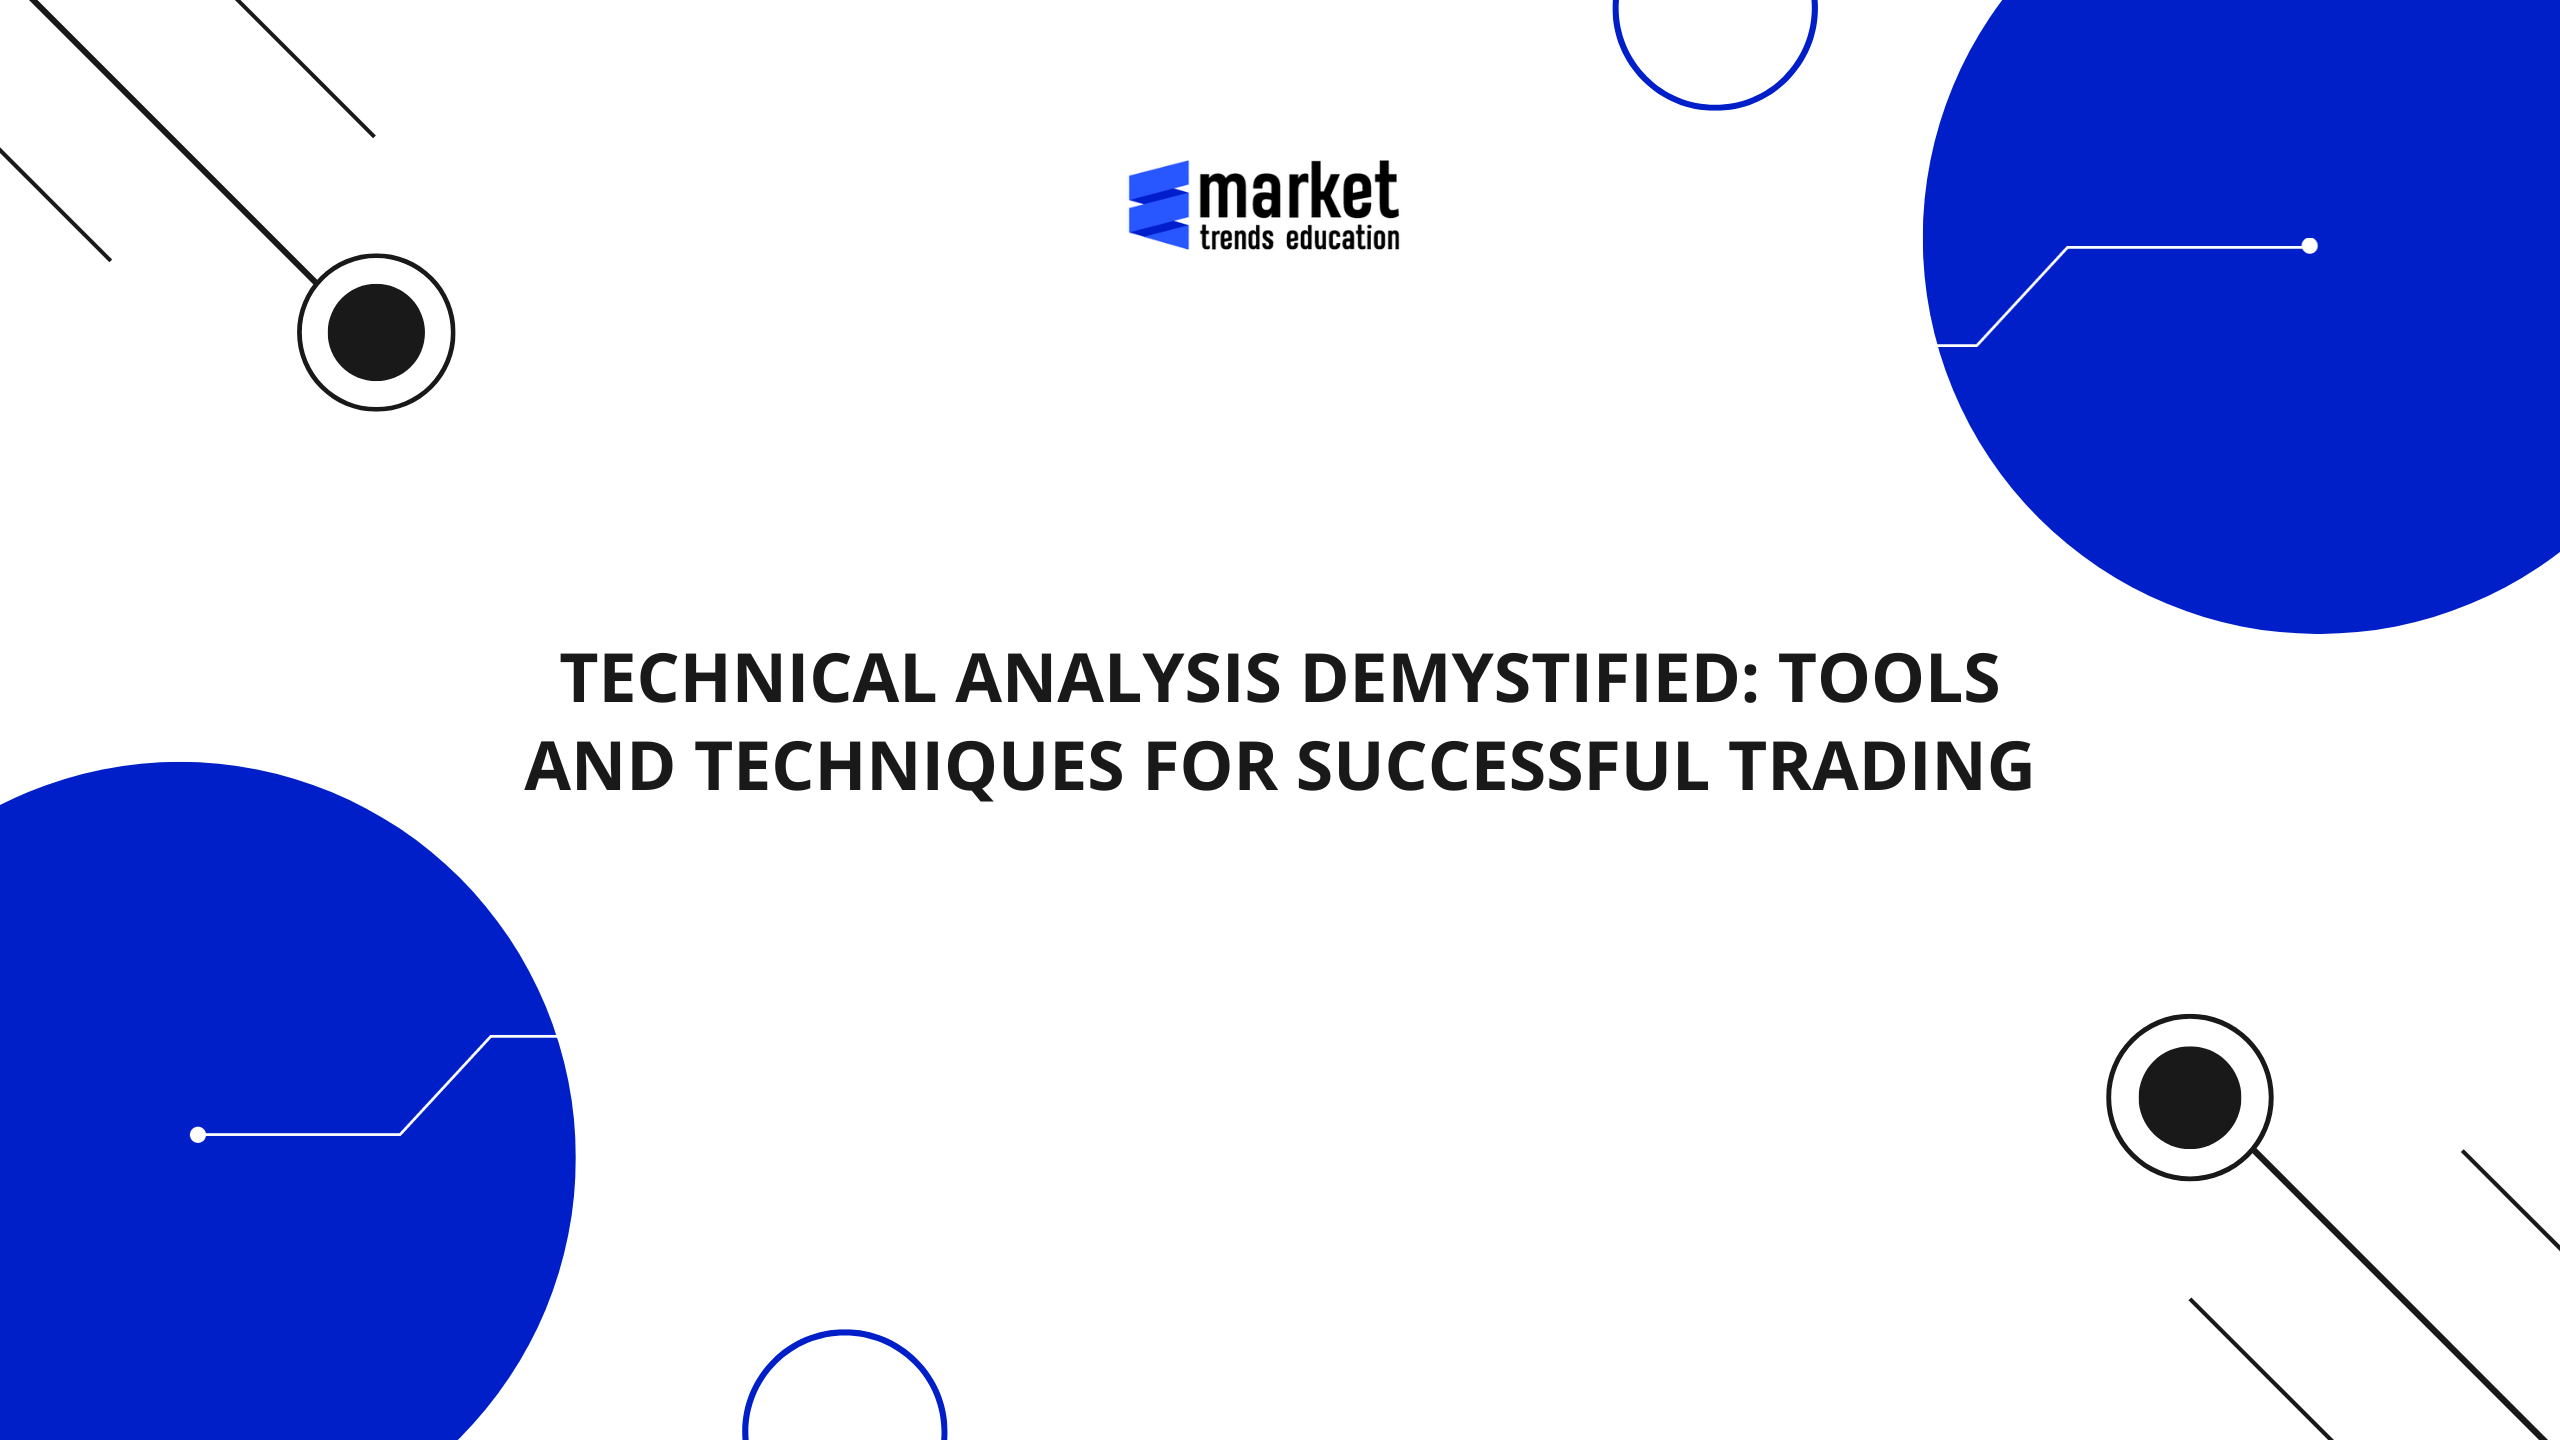 Technical Analysis Demystified: Tools and Techniques for Successful Trading